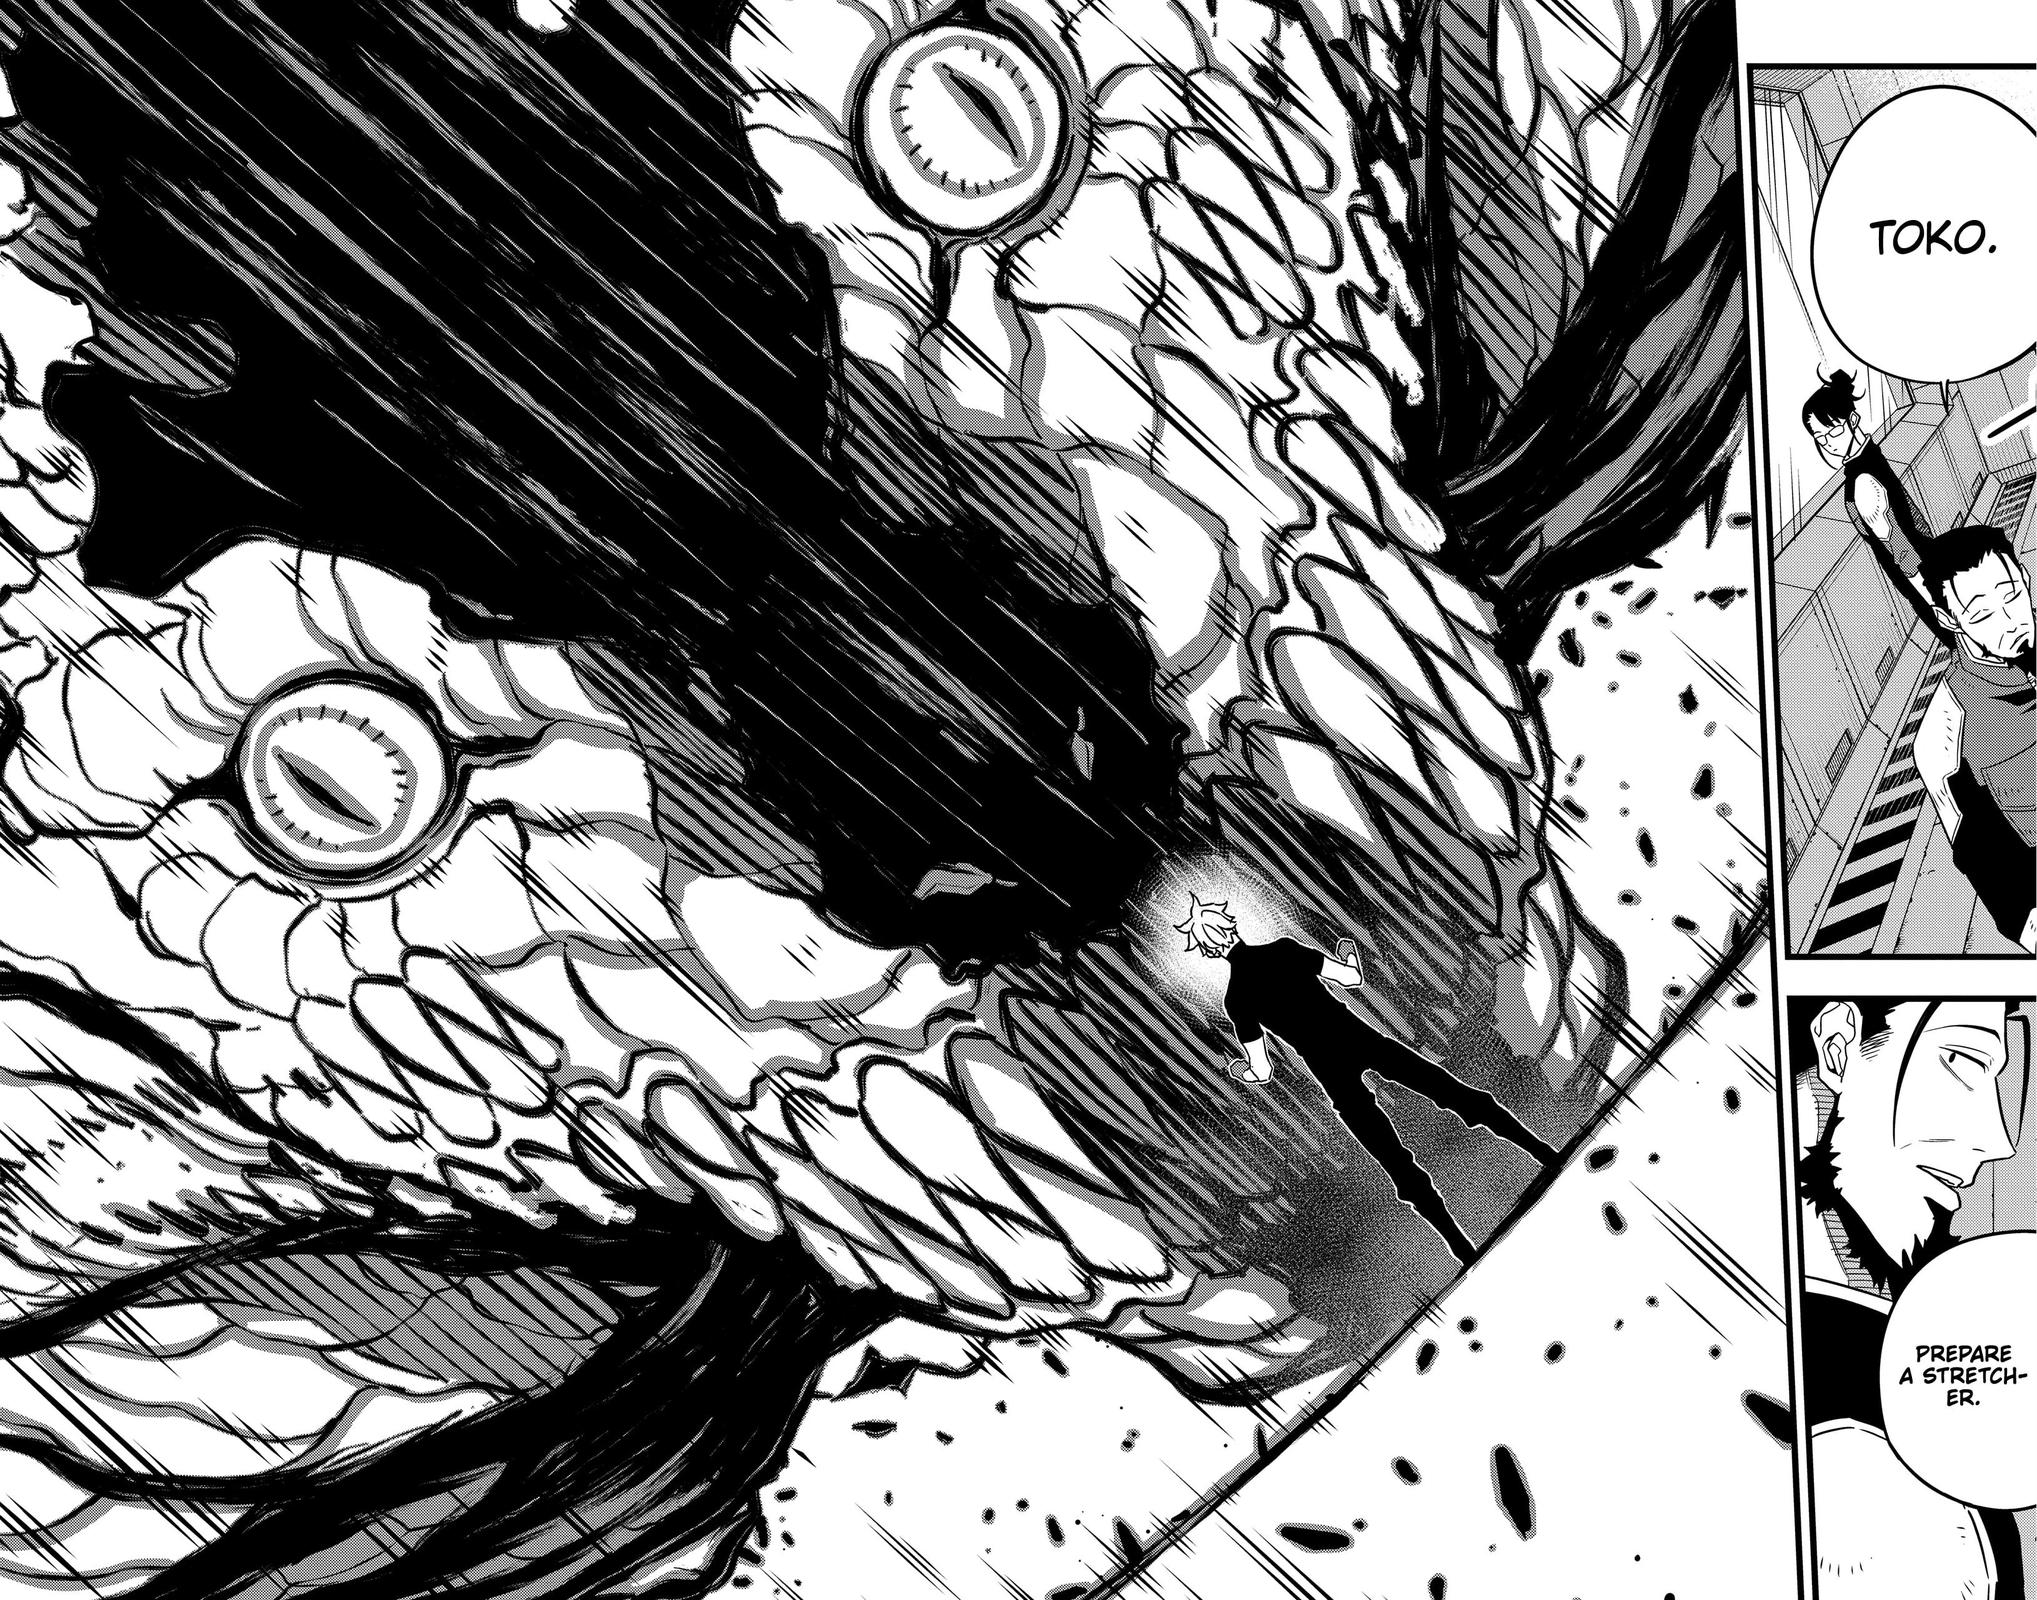 Kaiju no 8 Chapter 59, monster #8 chapter 59